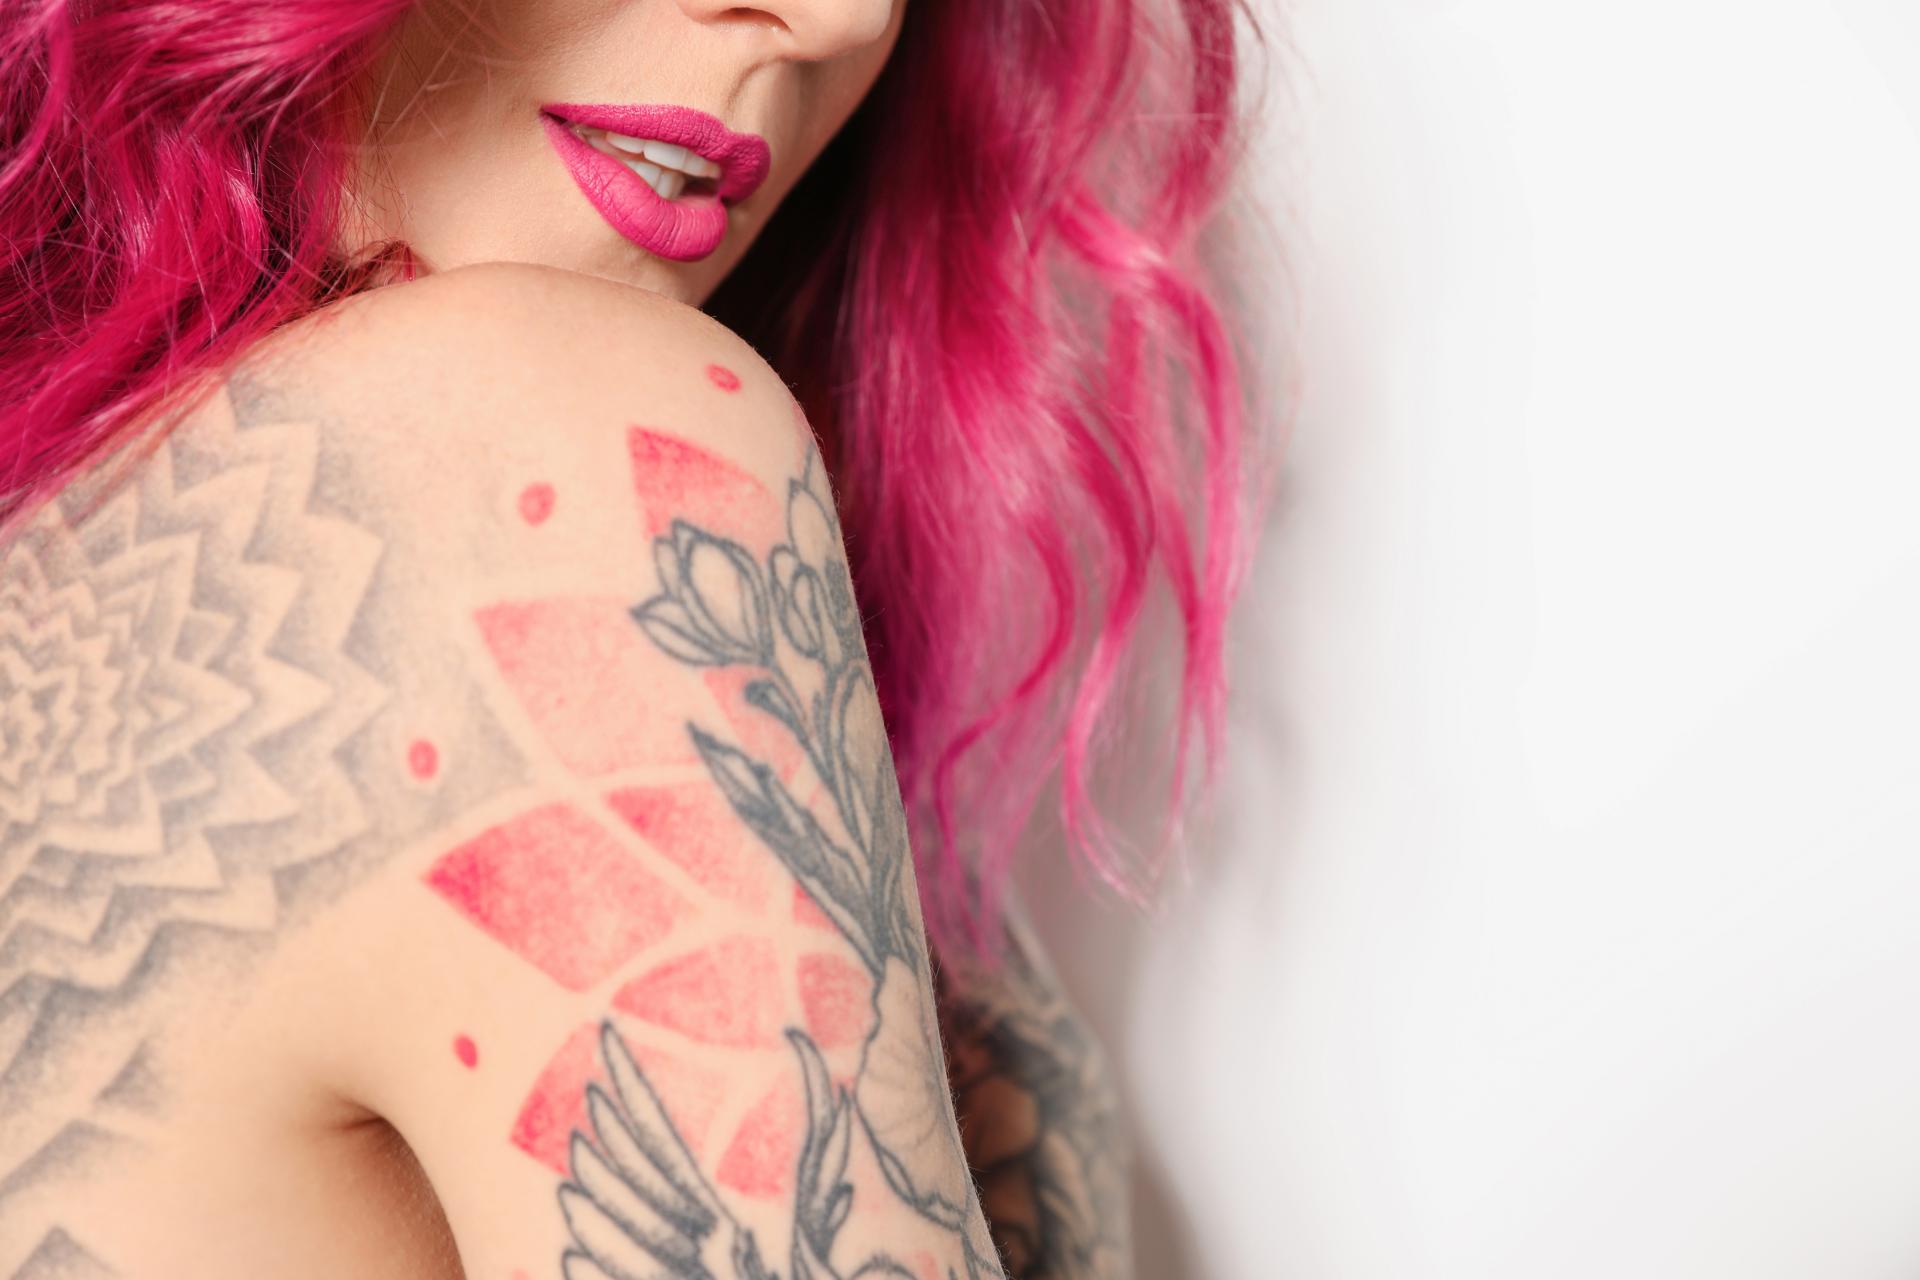 Unexpected Craving for a Tattooed Girl for My Wife hq photo